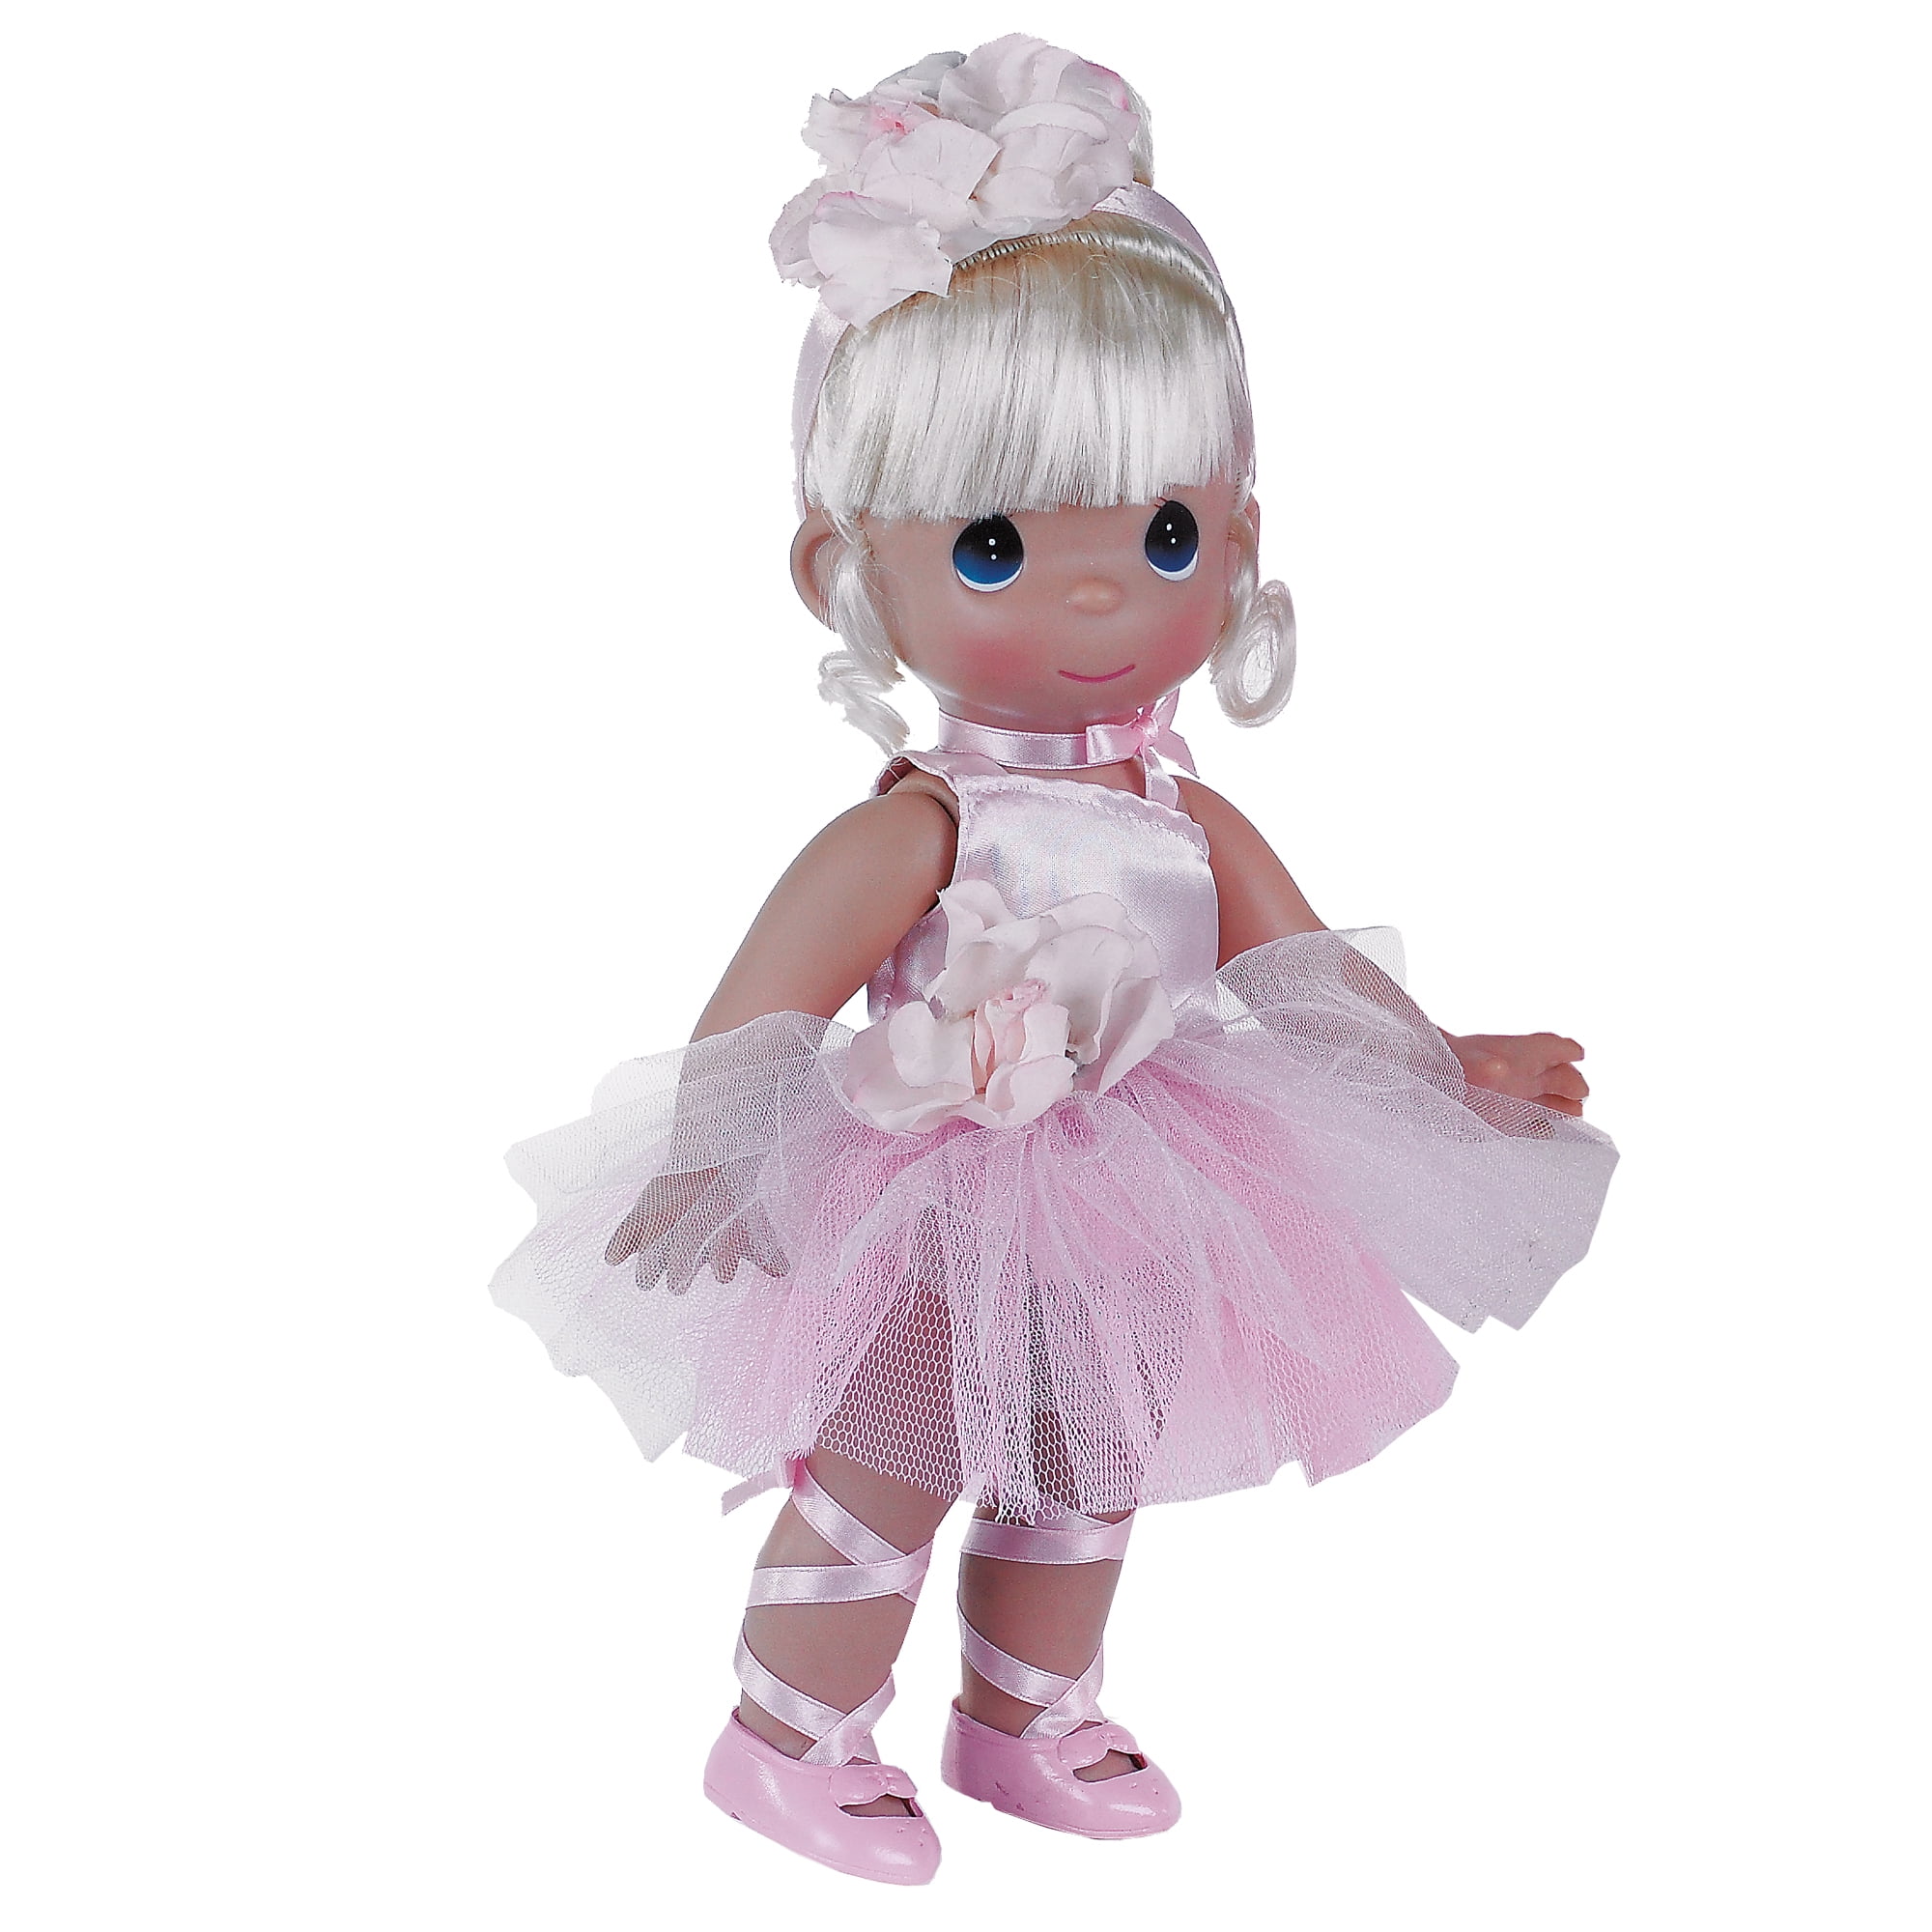 12 inch Doll PRCM9 6618 Linda Rick You are My Treasure Precious Moments Dolls by The Doll Maker